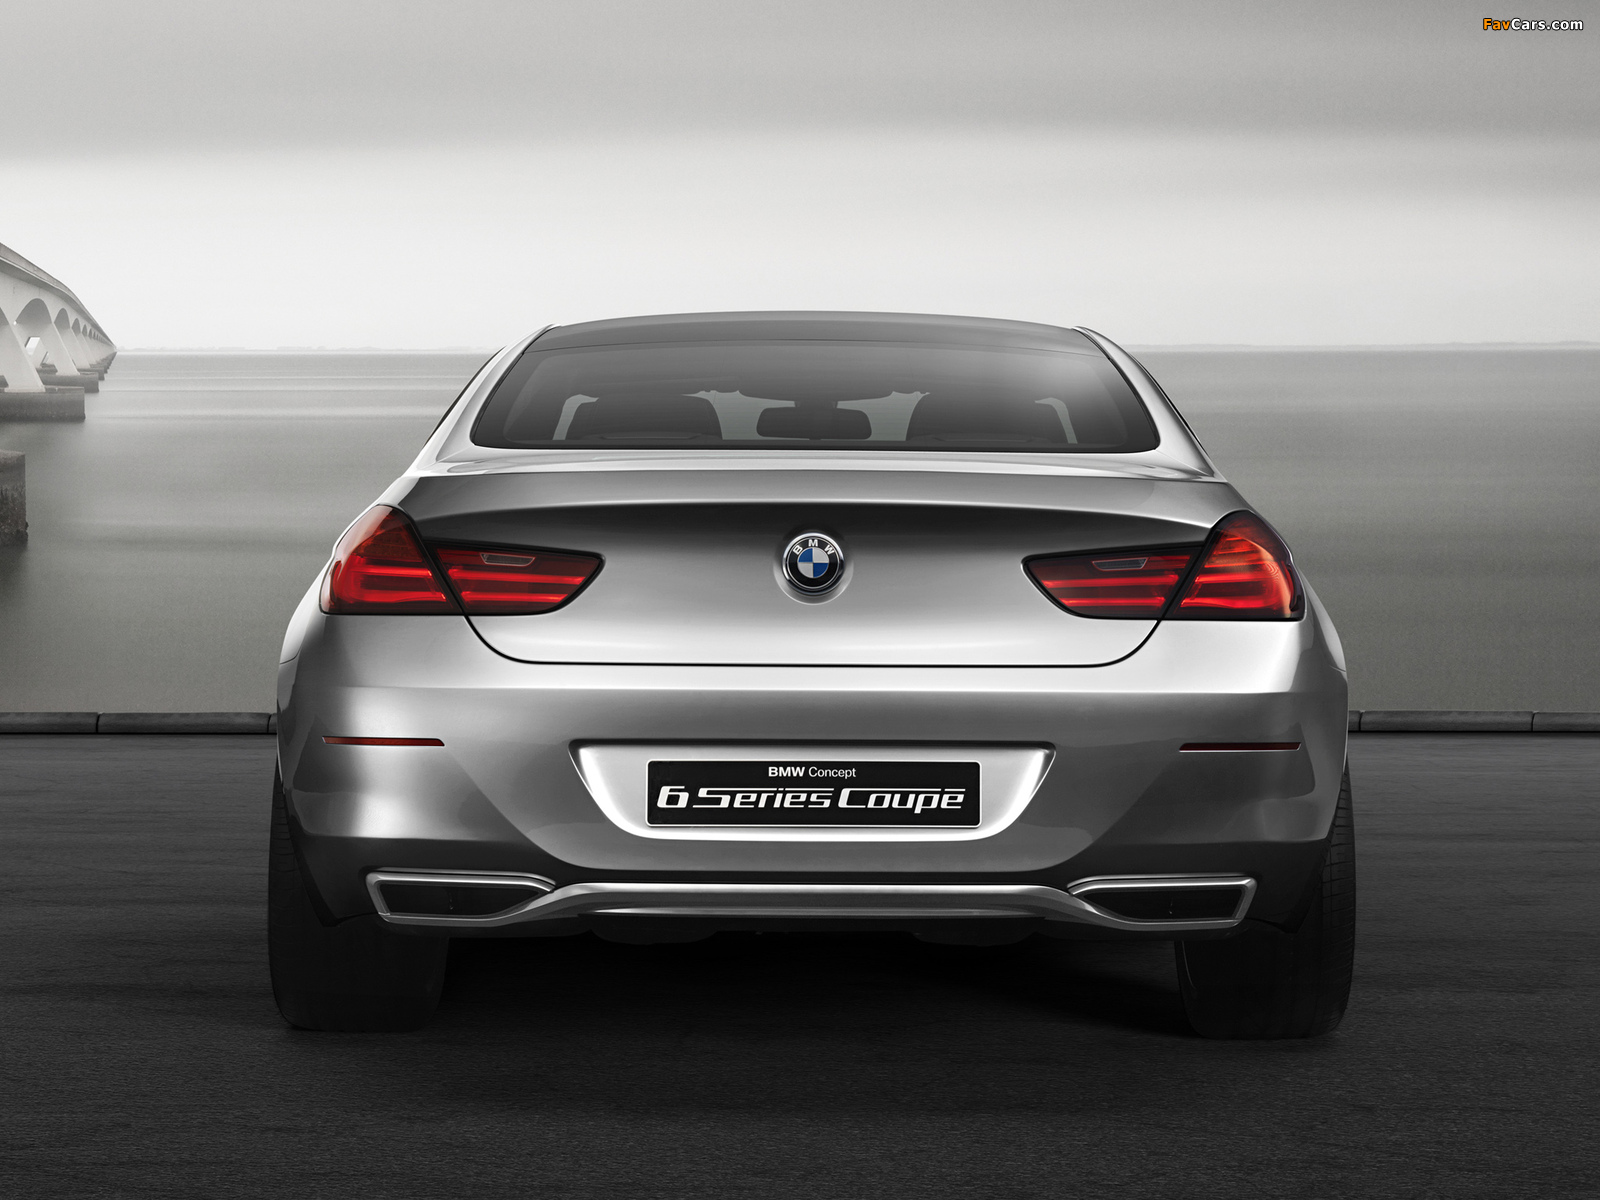 BMW 6 Series Coupe Concept (F12) 2010 images (1600 x 1200)